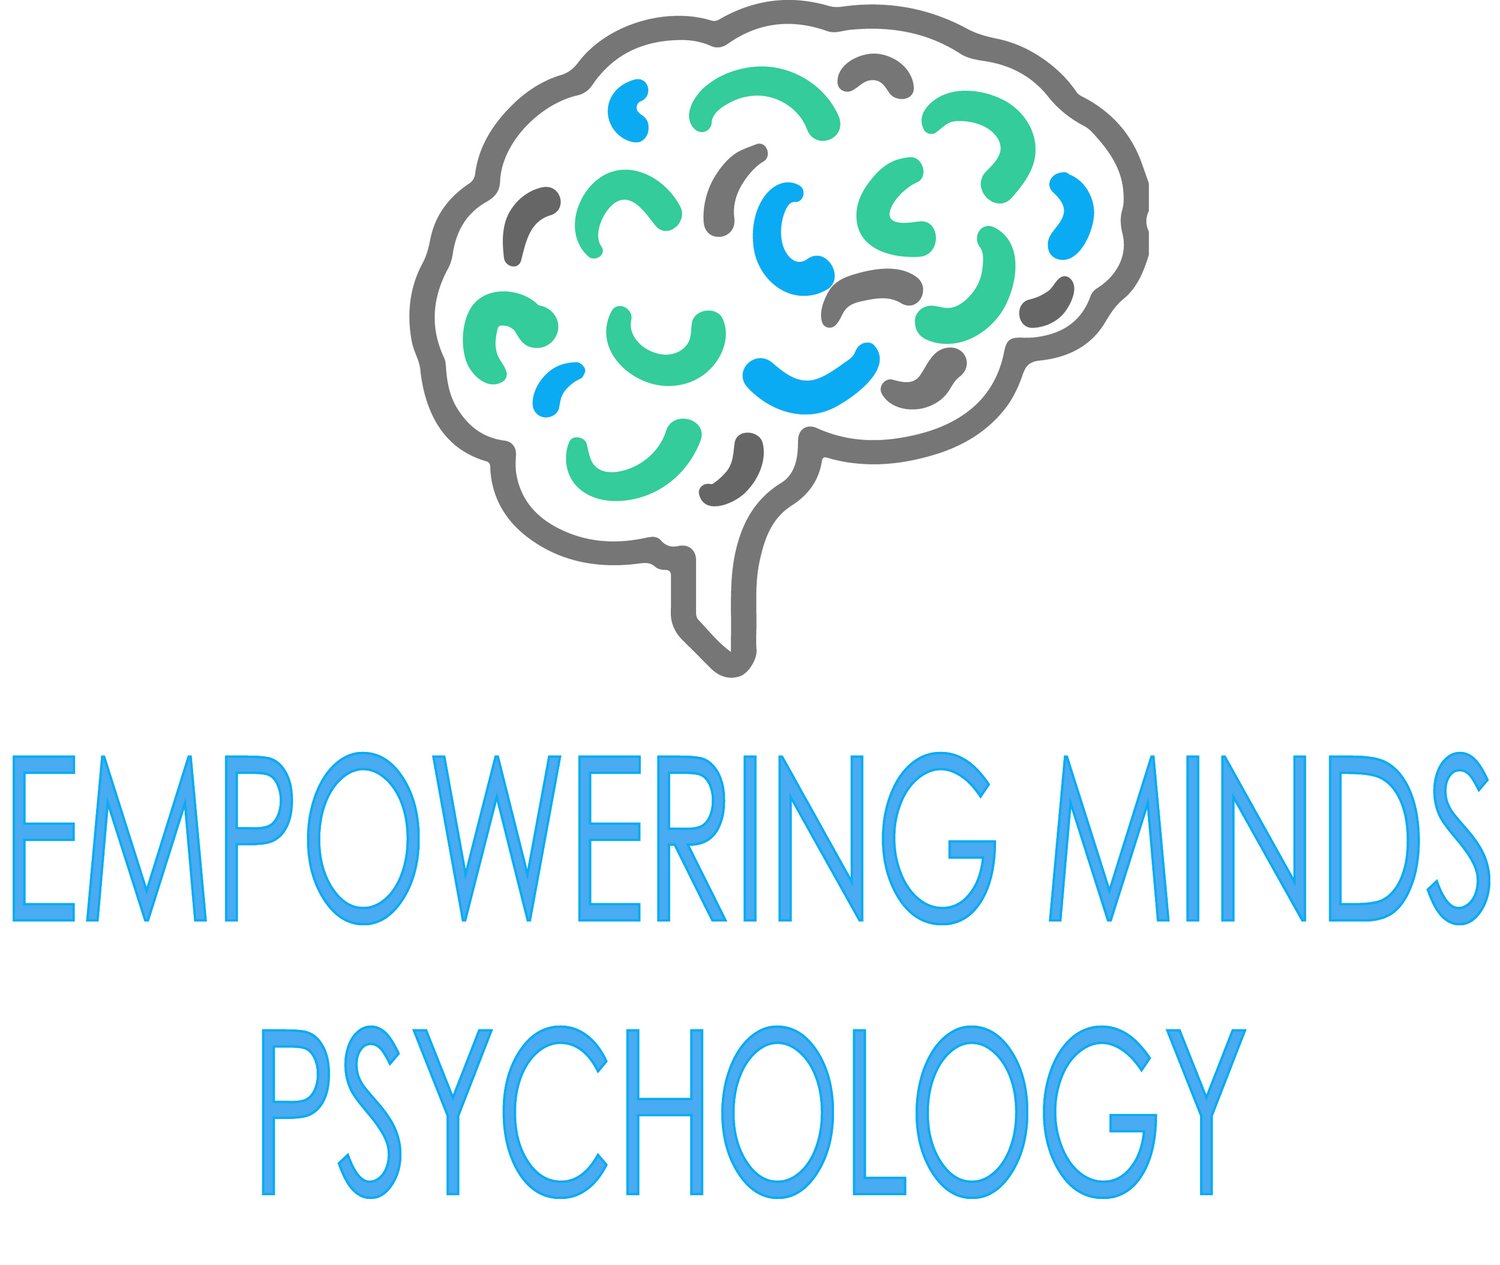 Empowering Minds Psychology